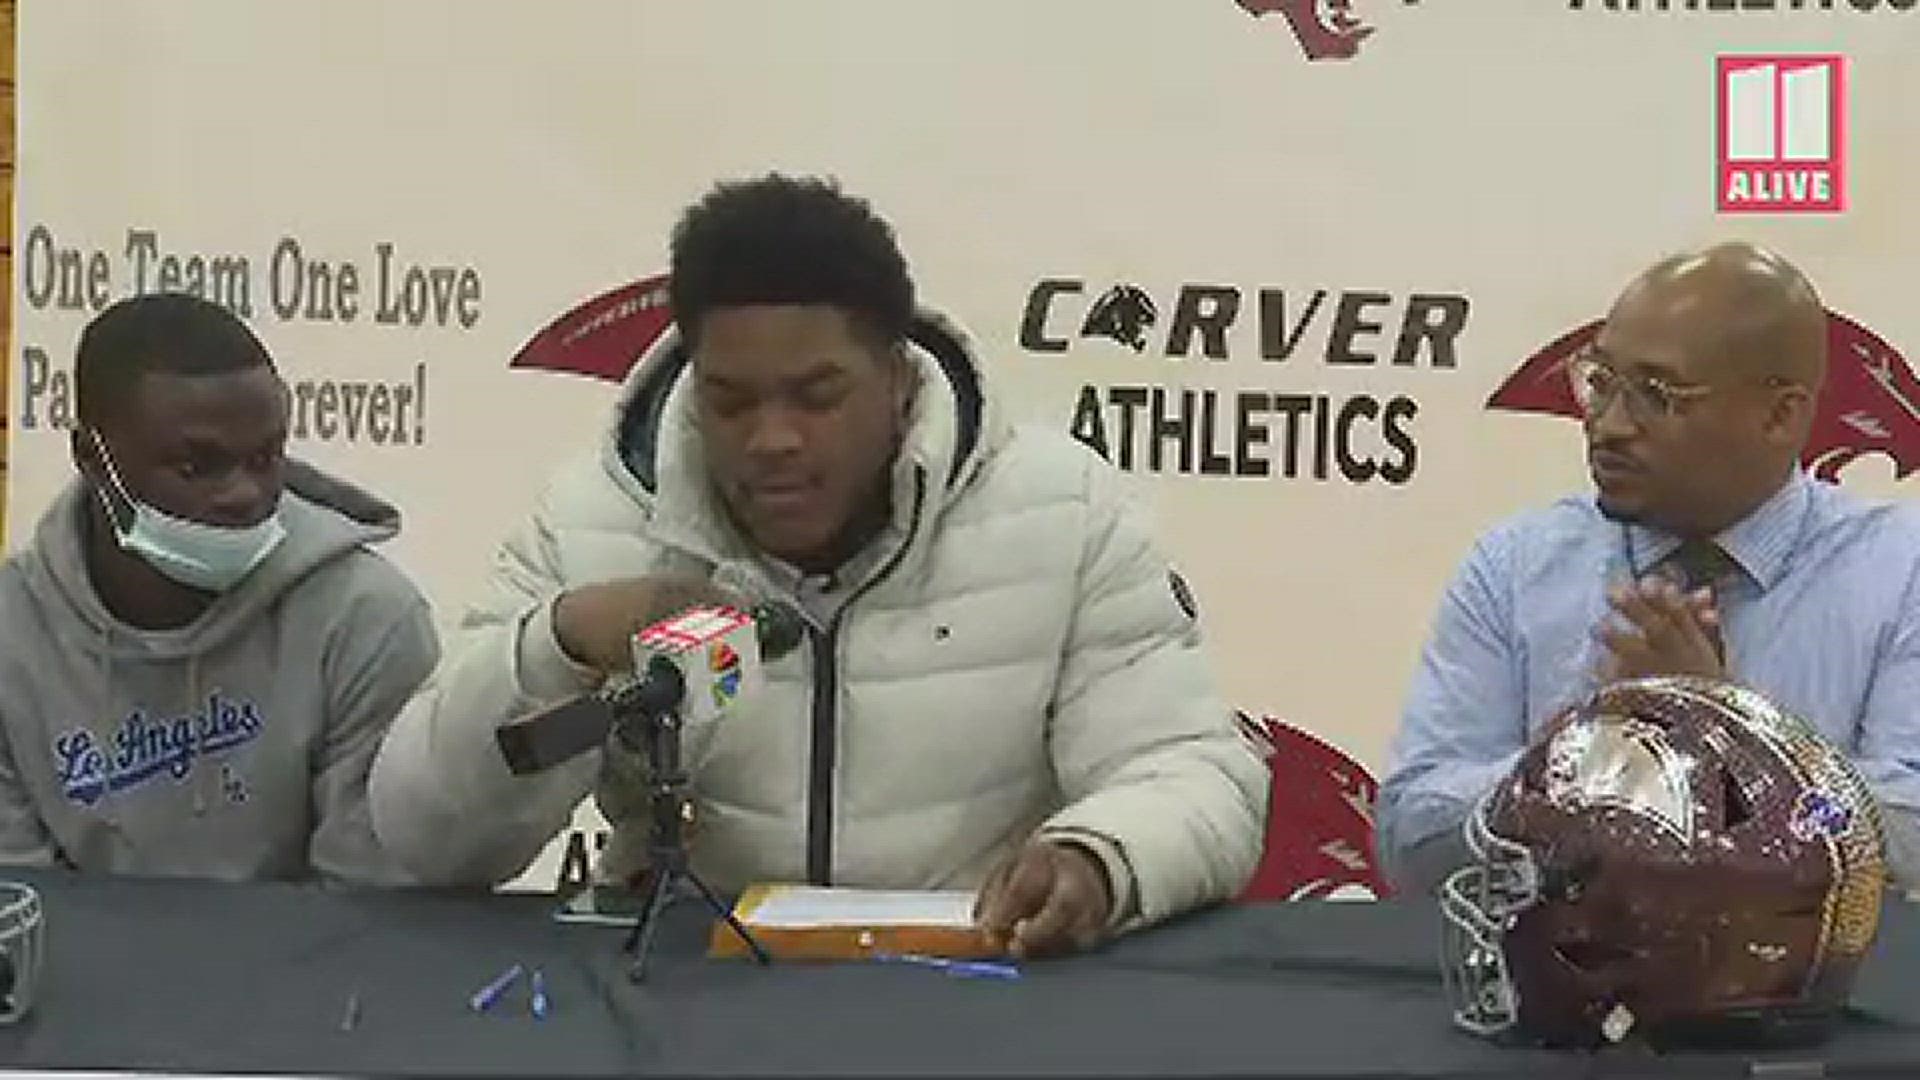 He made the announcement on National Signing Day.